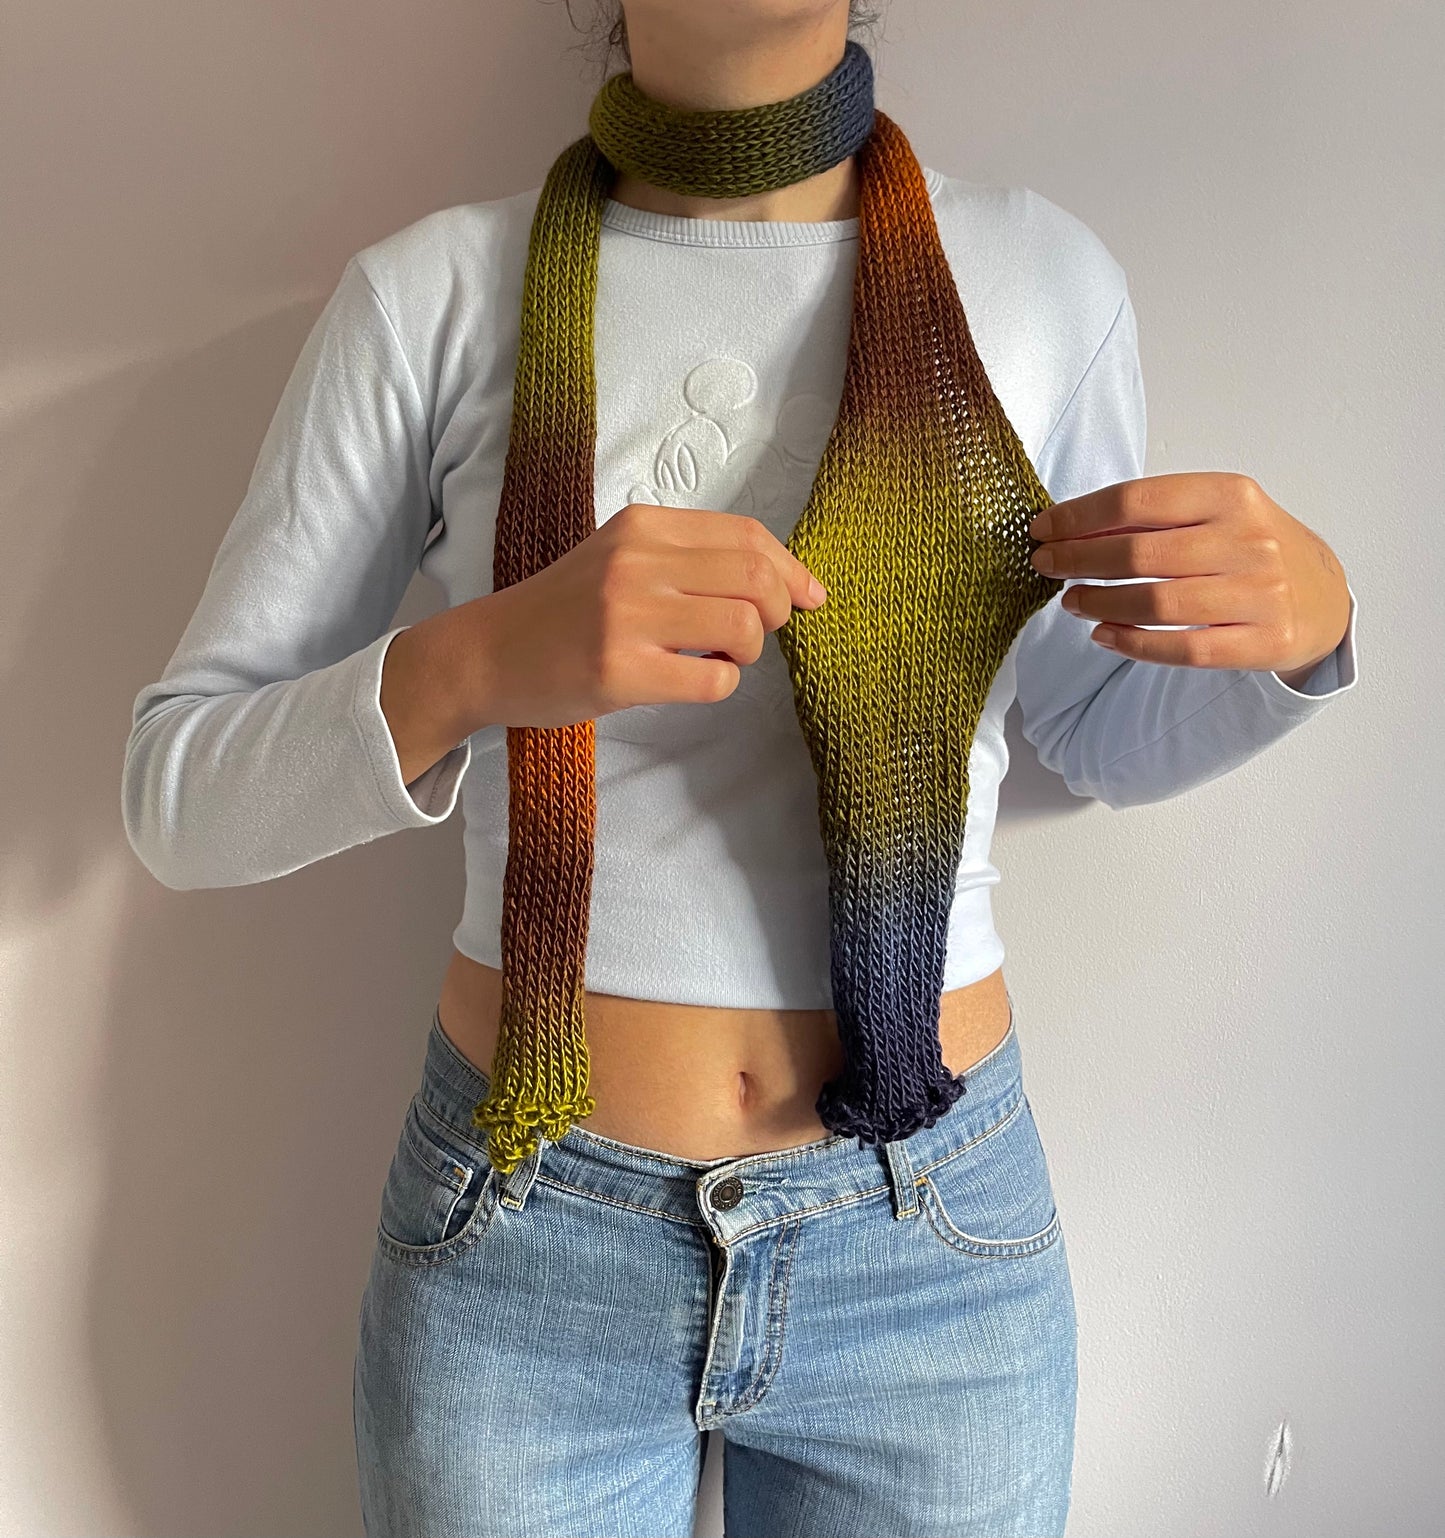 Handmade knitted ombré skinny scarf - Aspen colourway